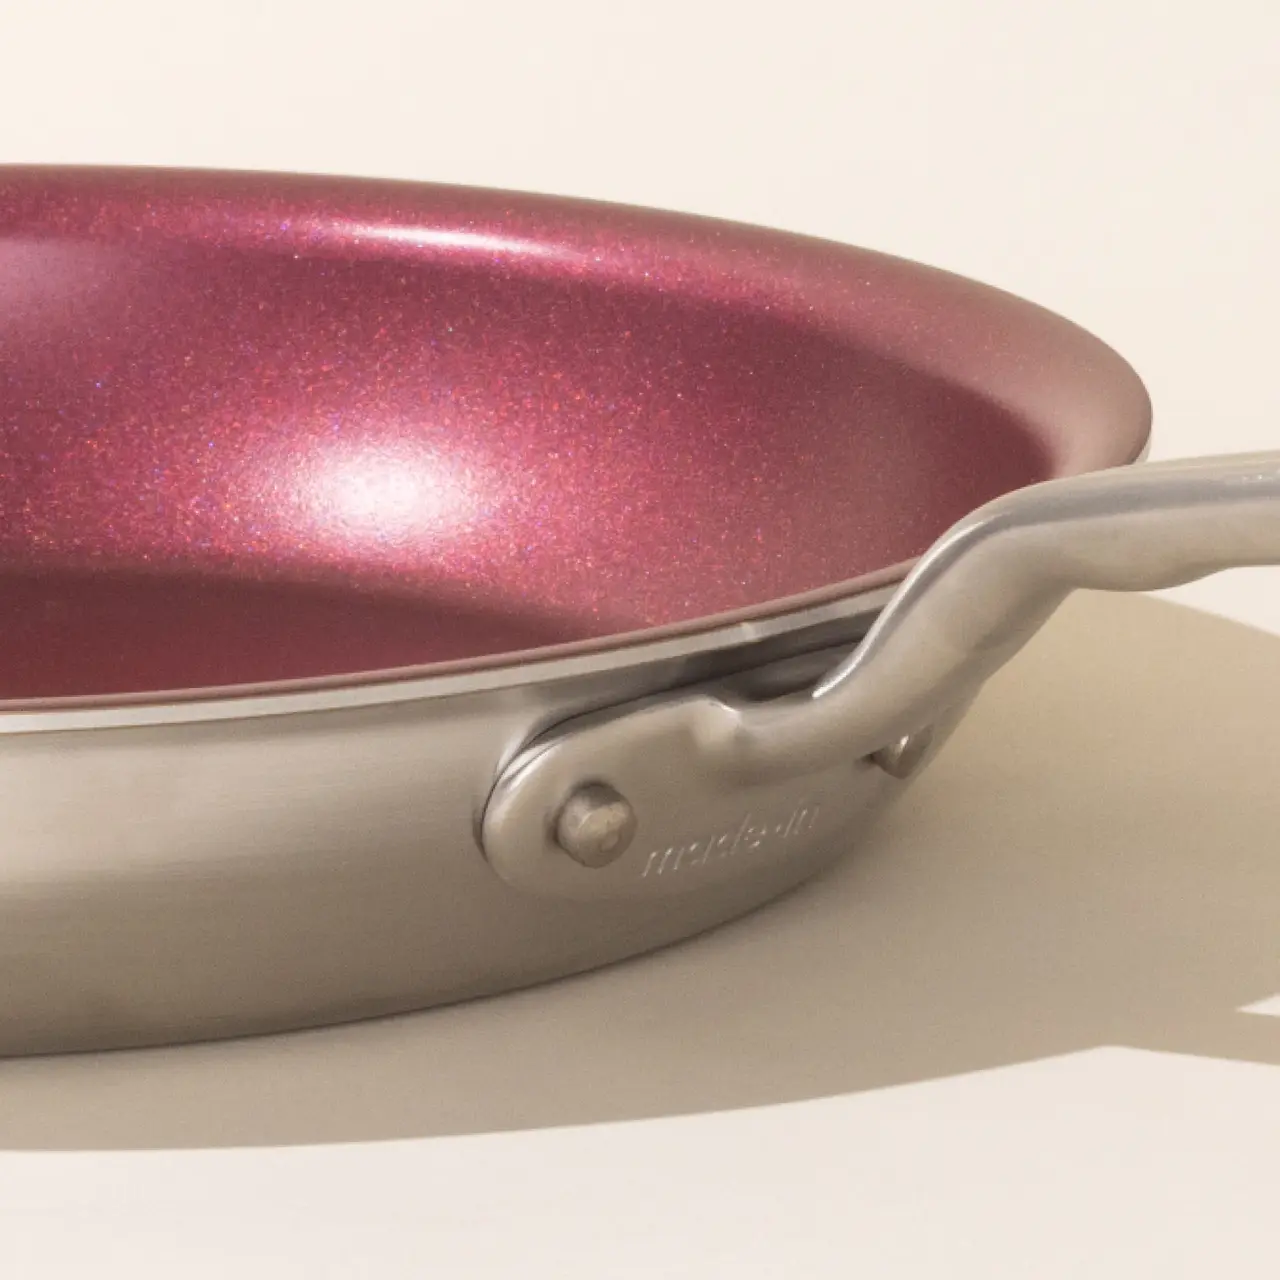 A close-up of a metallic frying pan with a red-hued interior and a riveted handle.